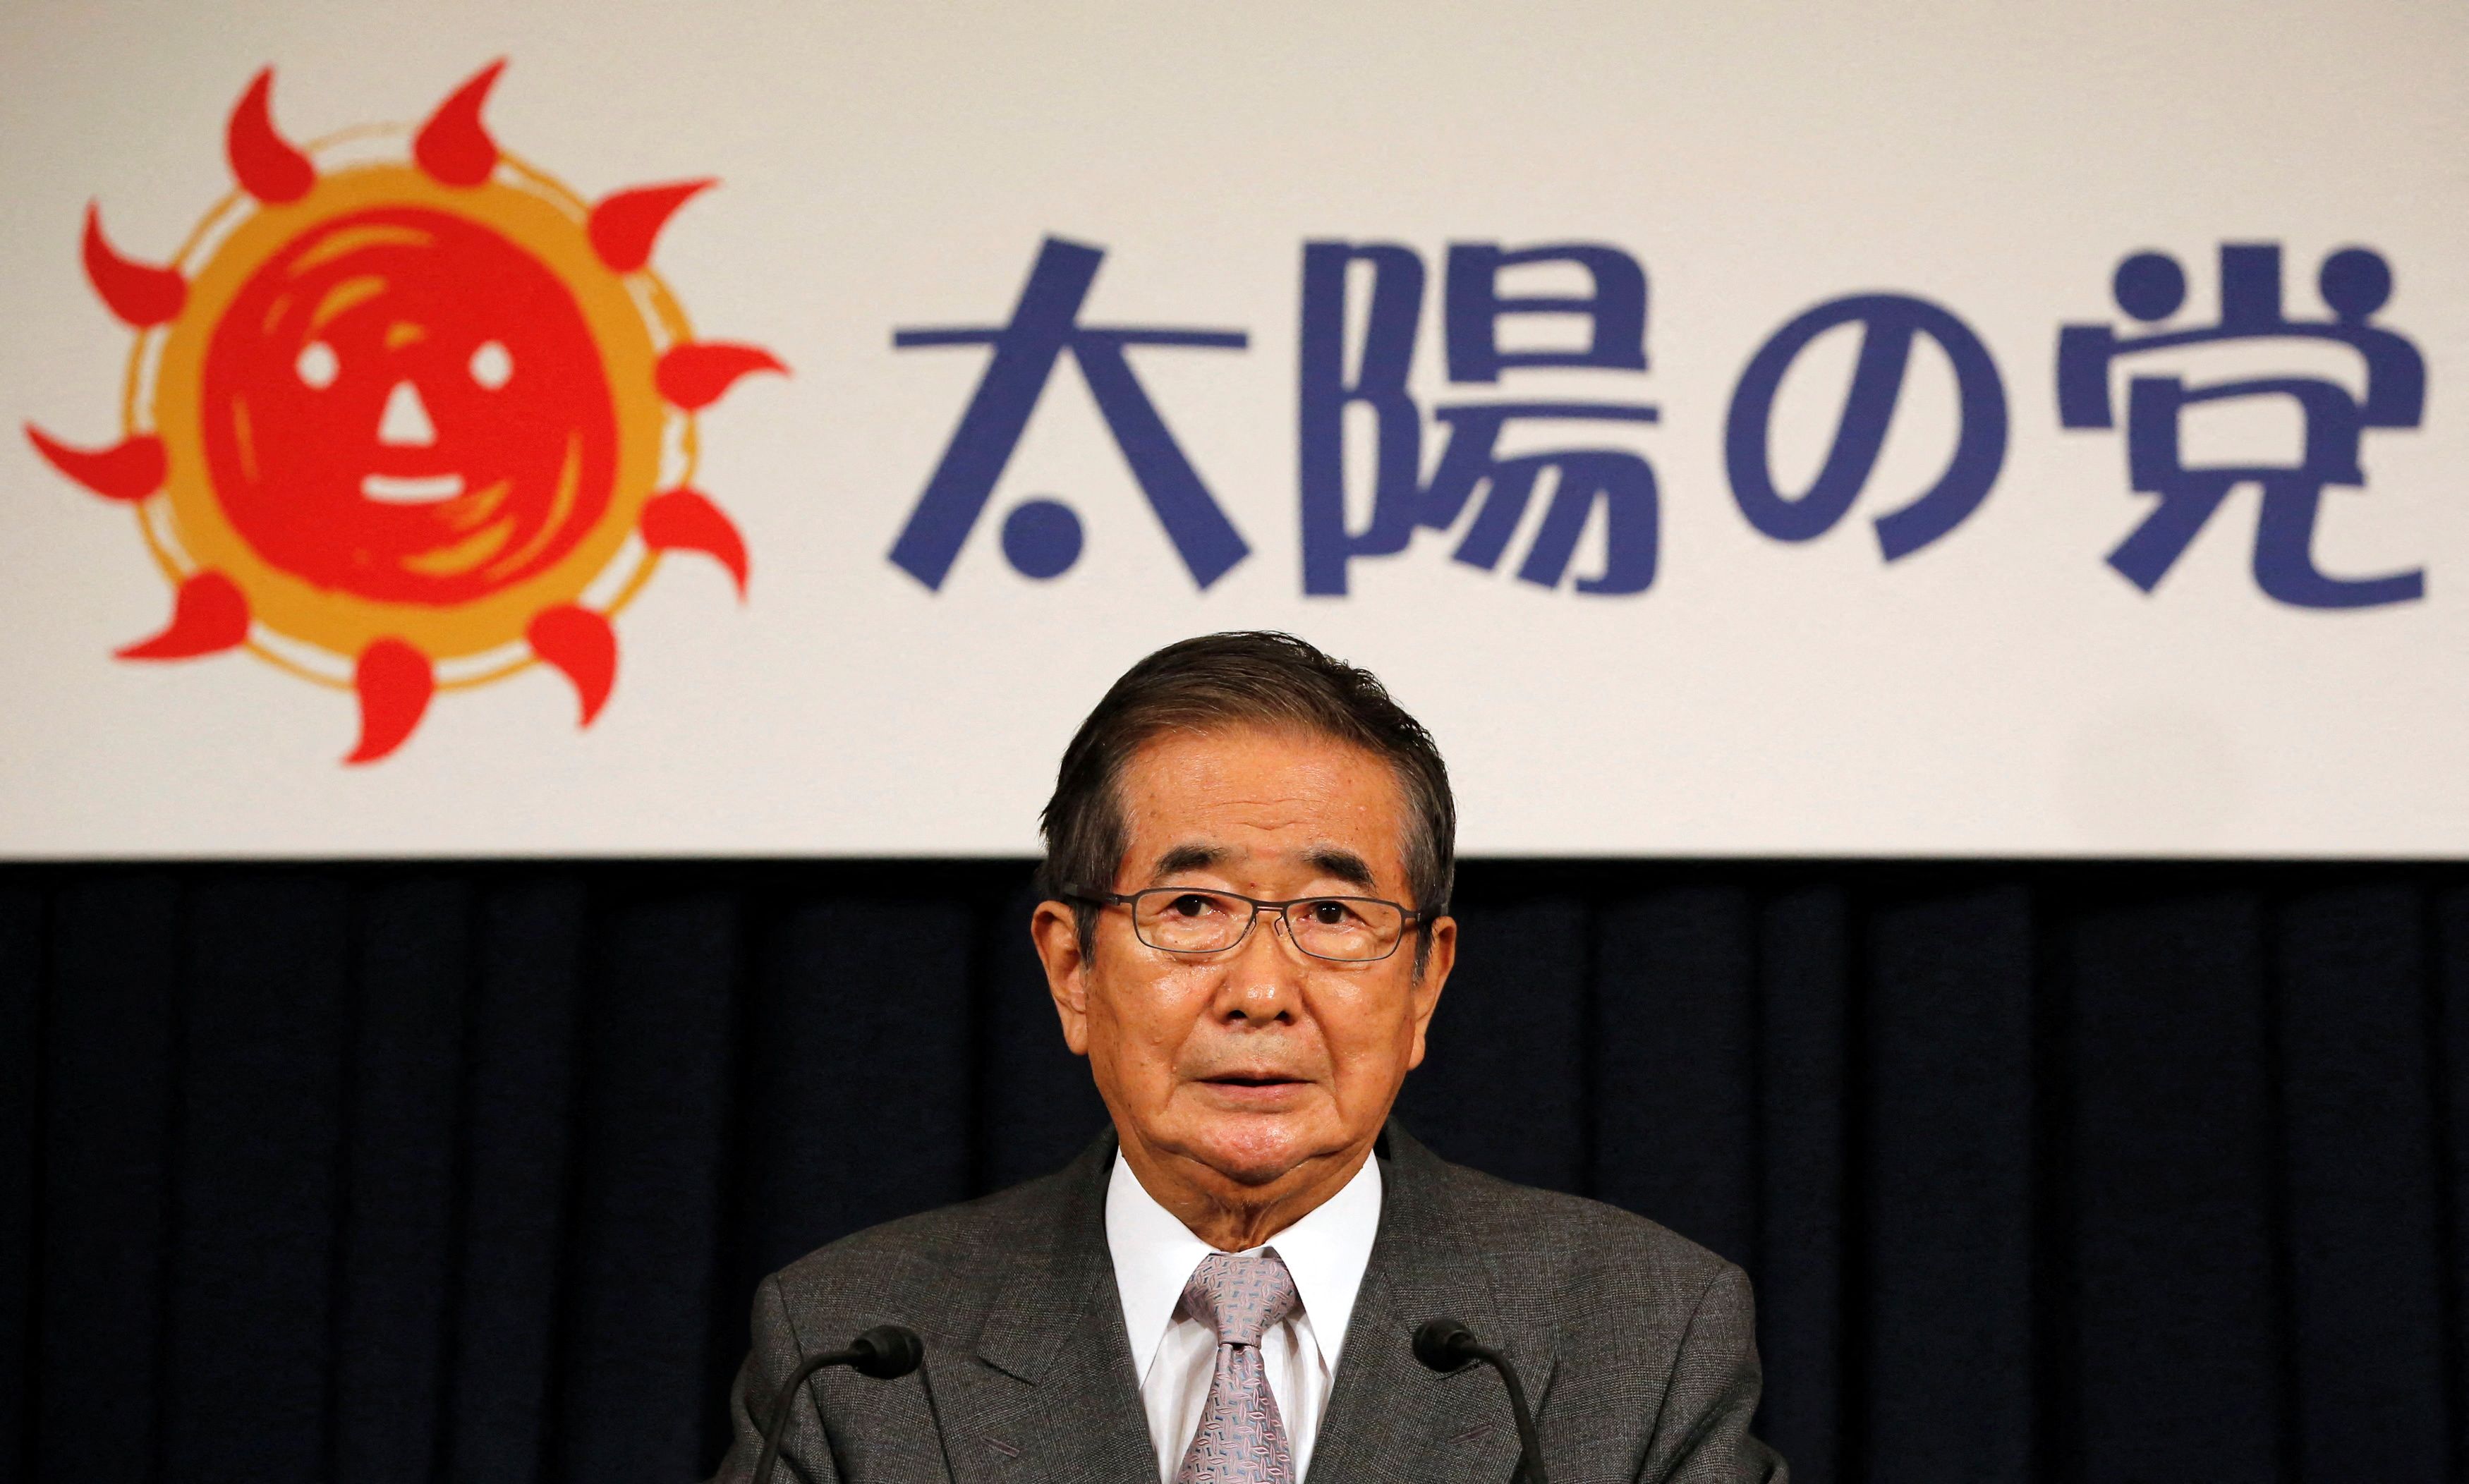 Former Tokyo Governor Ishihara speaks in front of the sign of his new party during a news conference in Tokyo